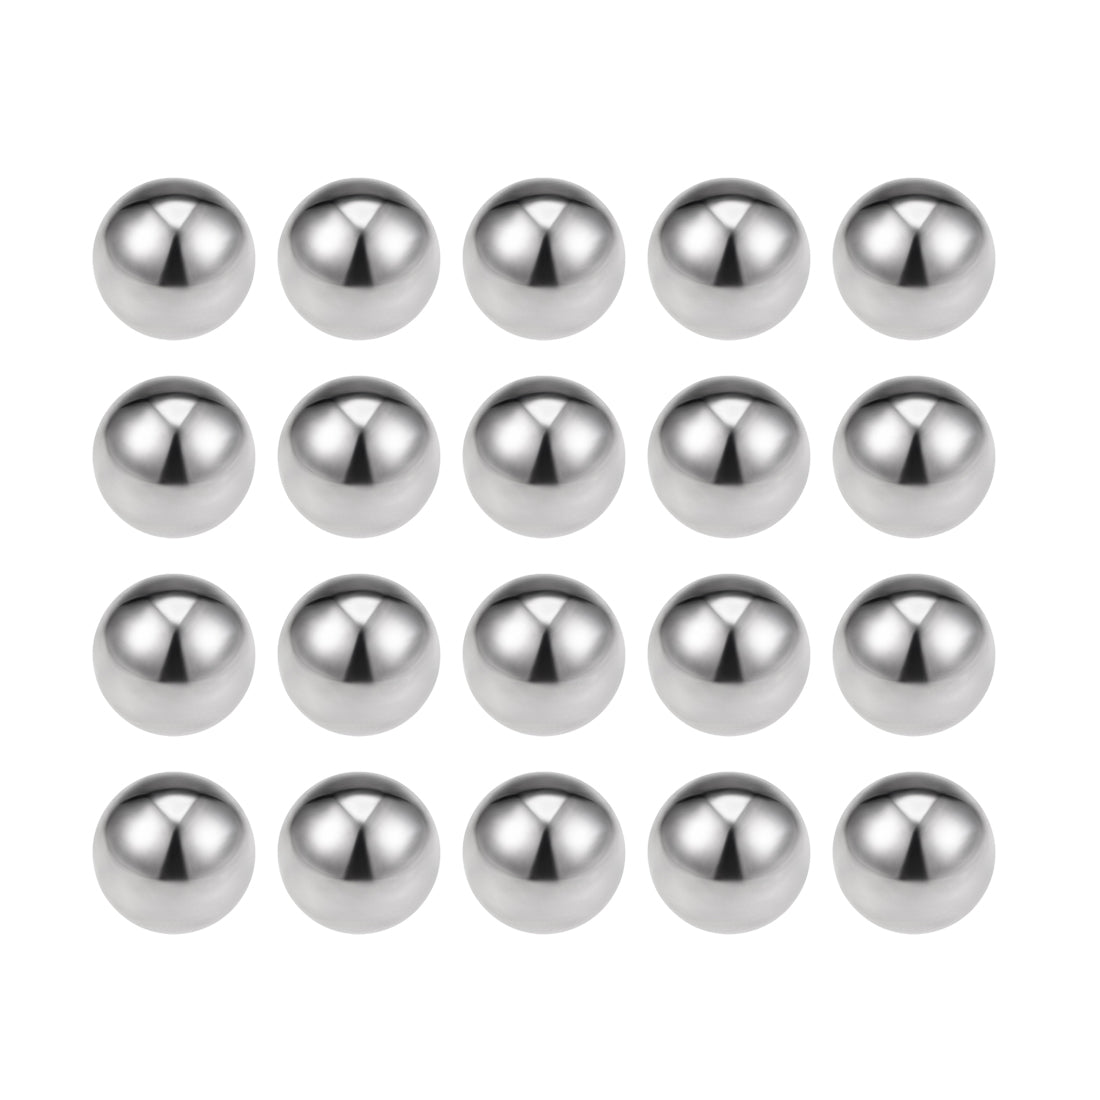 Uxcell Uxcell 7/32" Bearing Balls 440C Stainless Steel G25 Precision Balls 200pcs